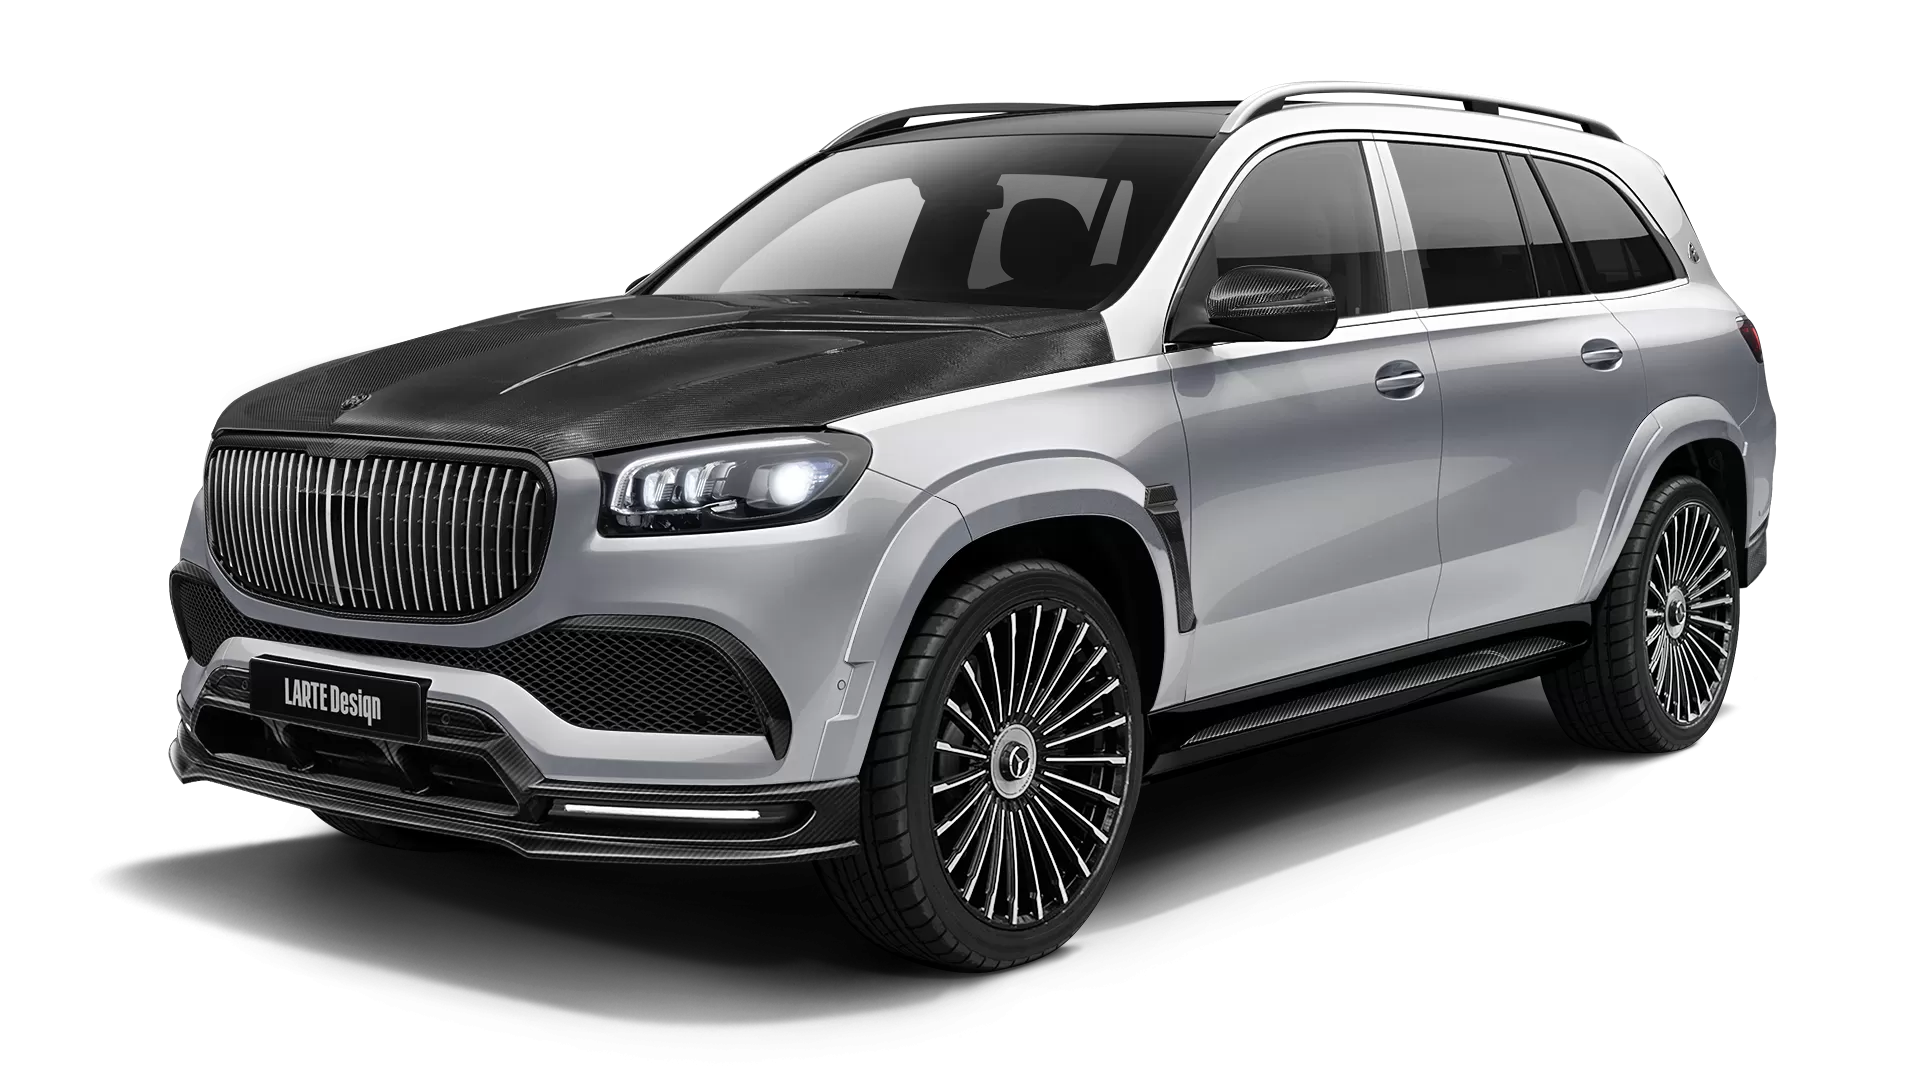 Mercedes Maybach GLS 600 with carbon body kit: front view shown in High Tech Silver & Diamond White